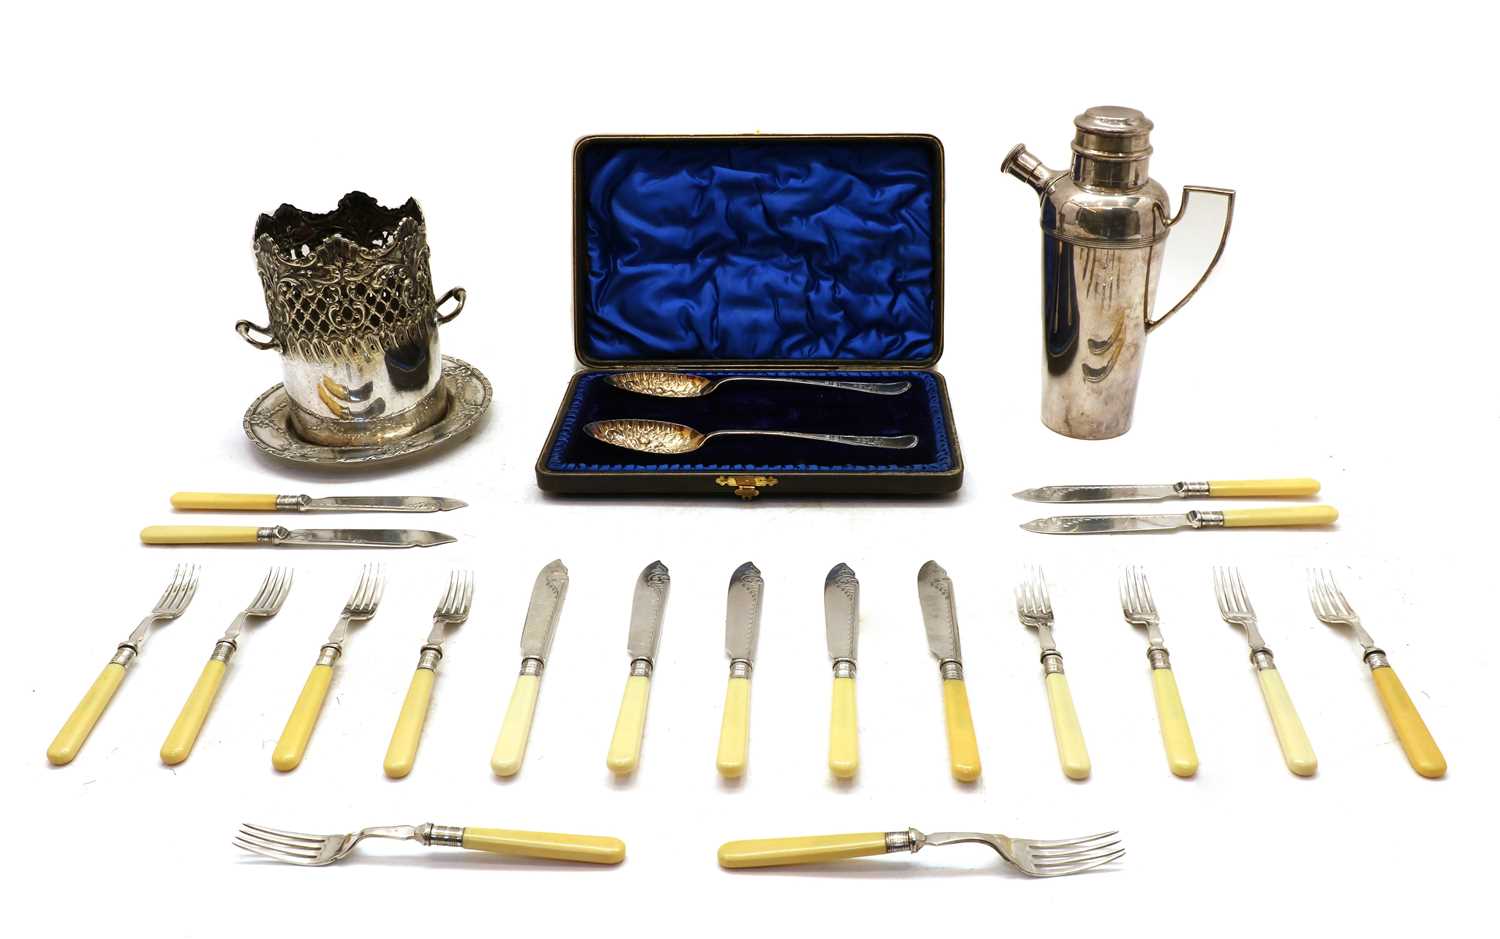 Lot 37 - Silver plated items